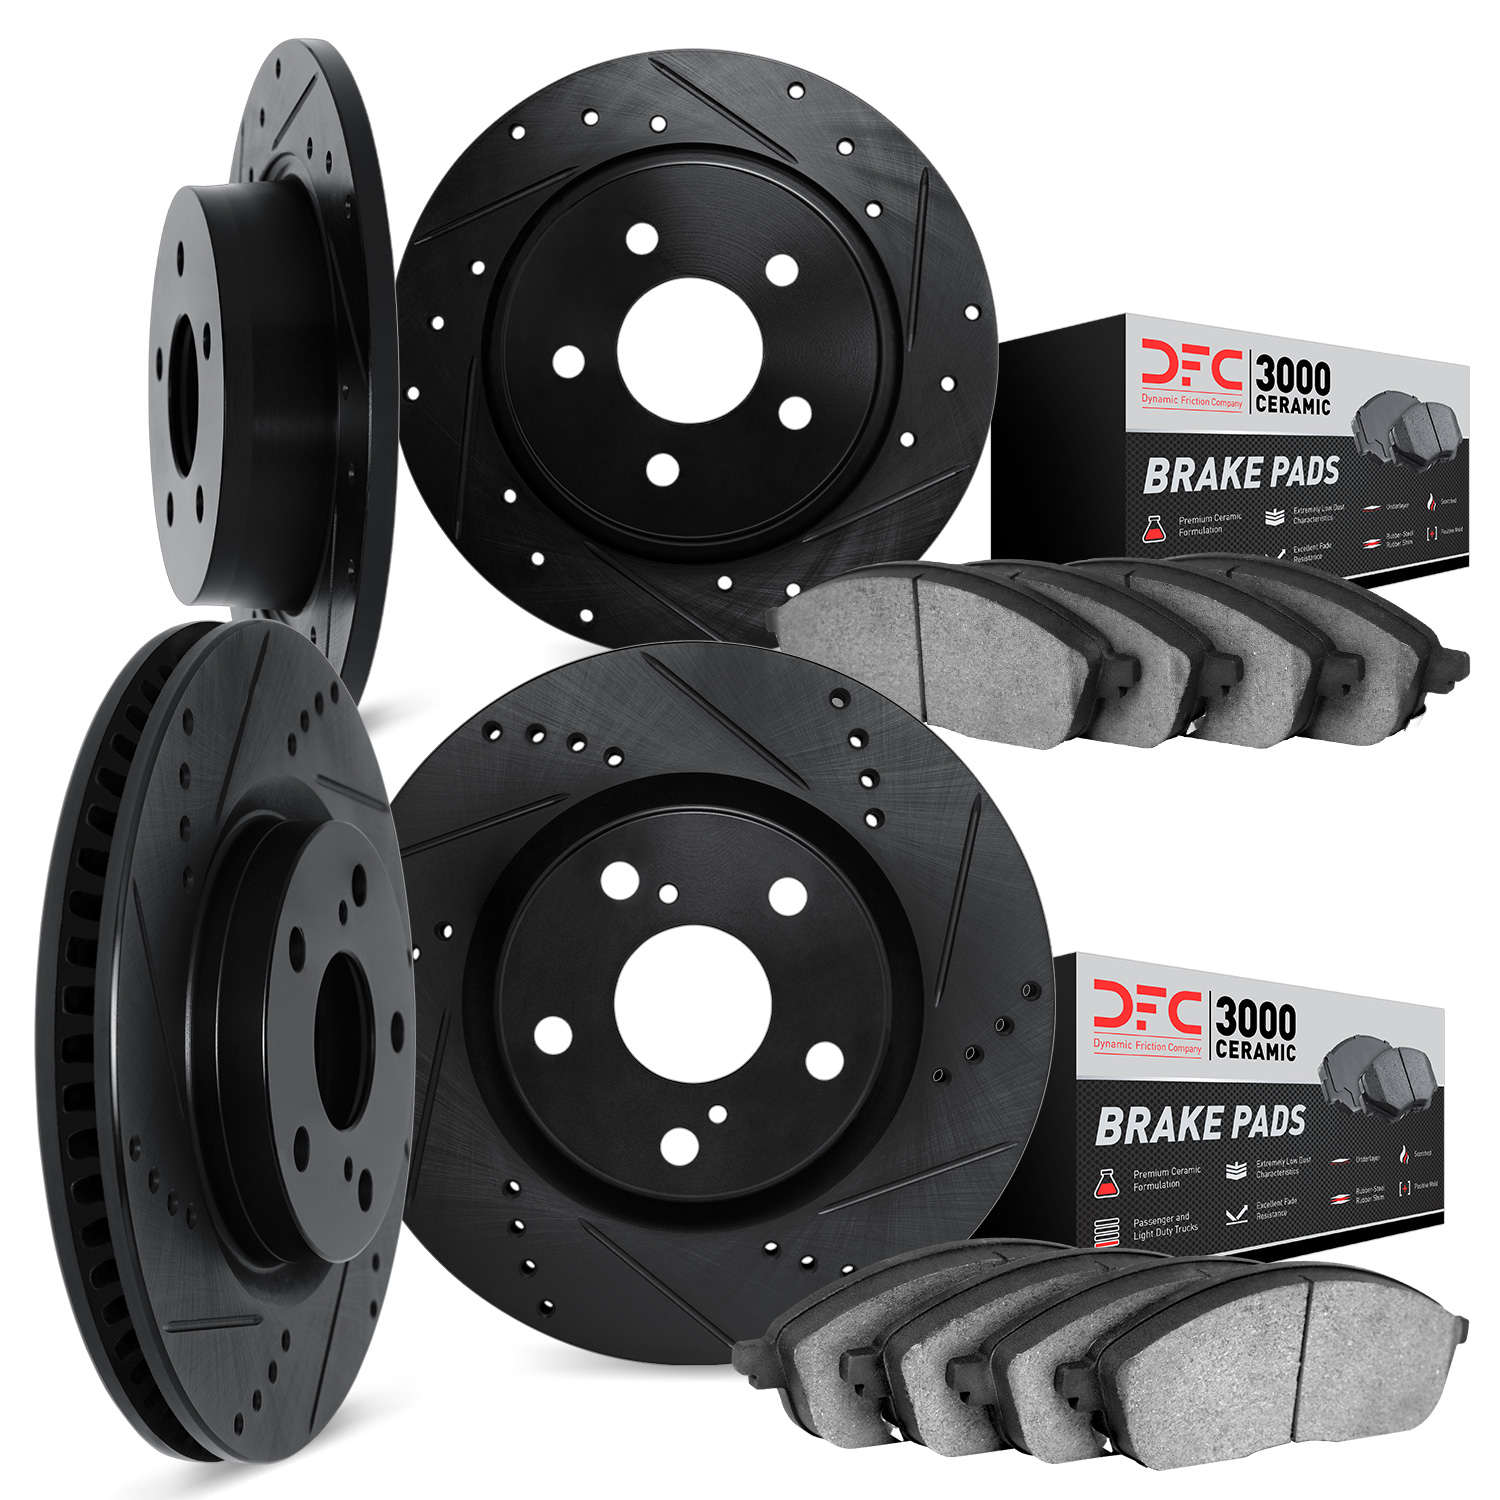 8304-13012 Drilled/Slotted Brake Rotors with 3000-Series Ceramic Brake Pads Kit [Black], 2000-2002 Subaru, Position: Front and R